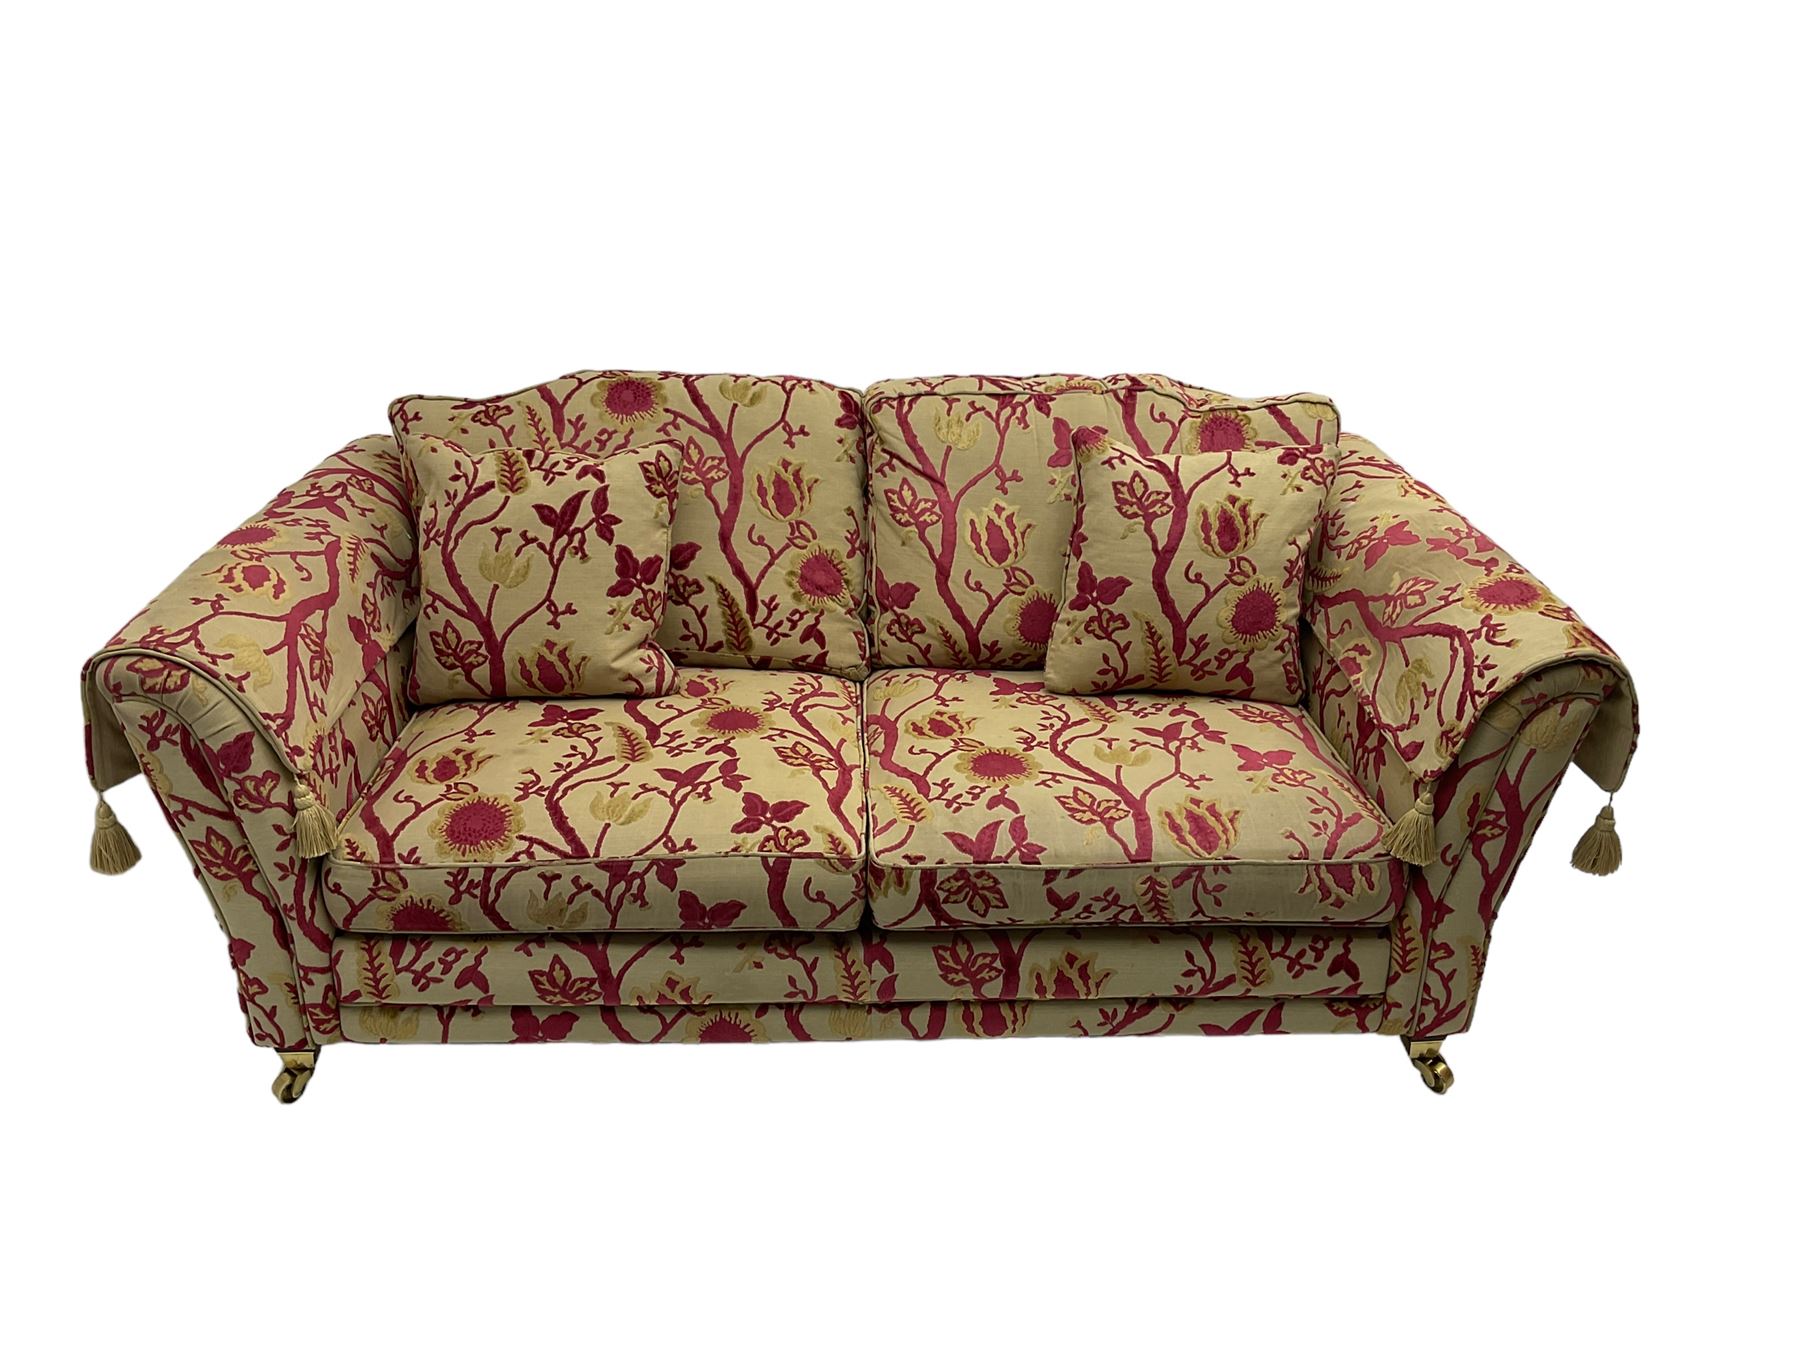 Three-piece lounge suite - large two-seat sofa upholstered in red and gold striped fabric (W185cm - Image 5 of 24